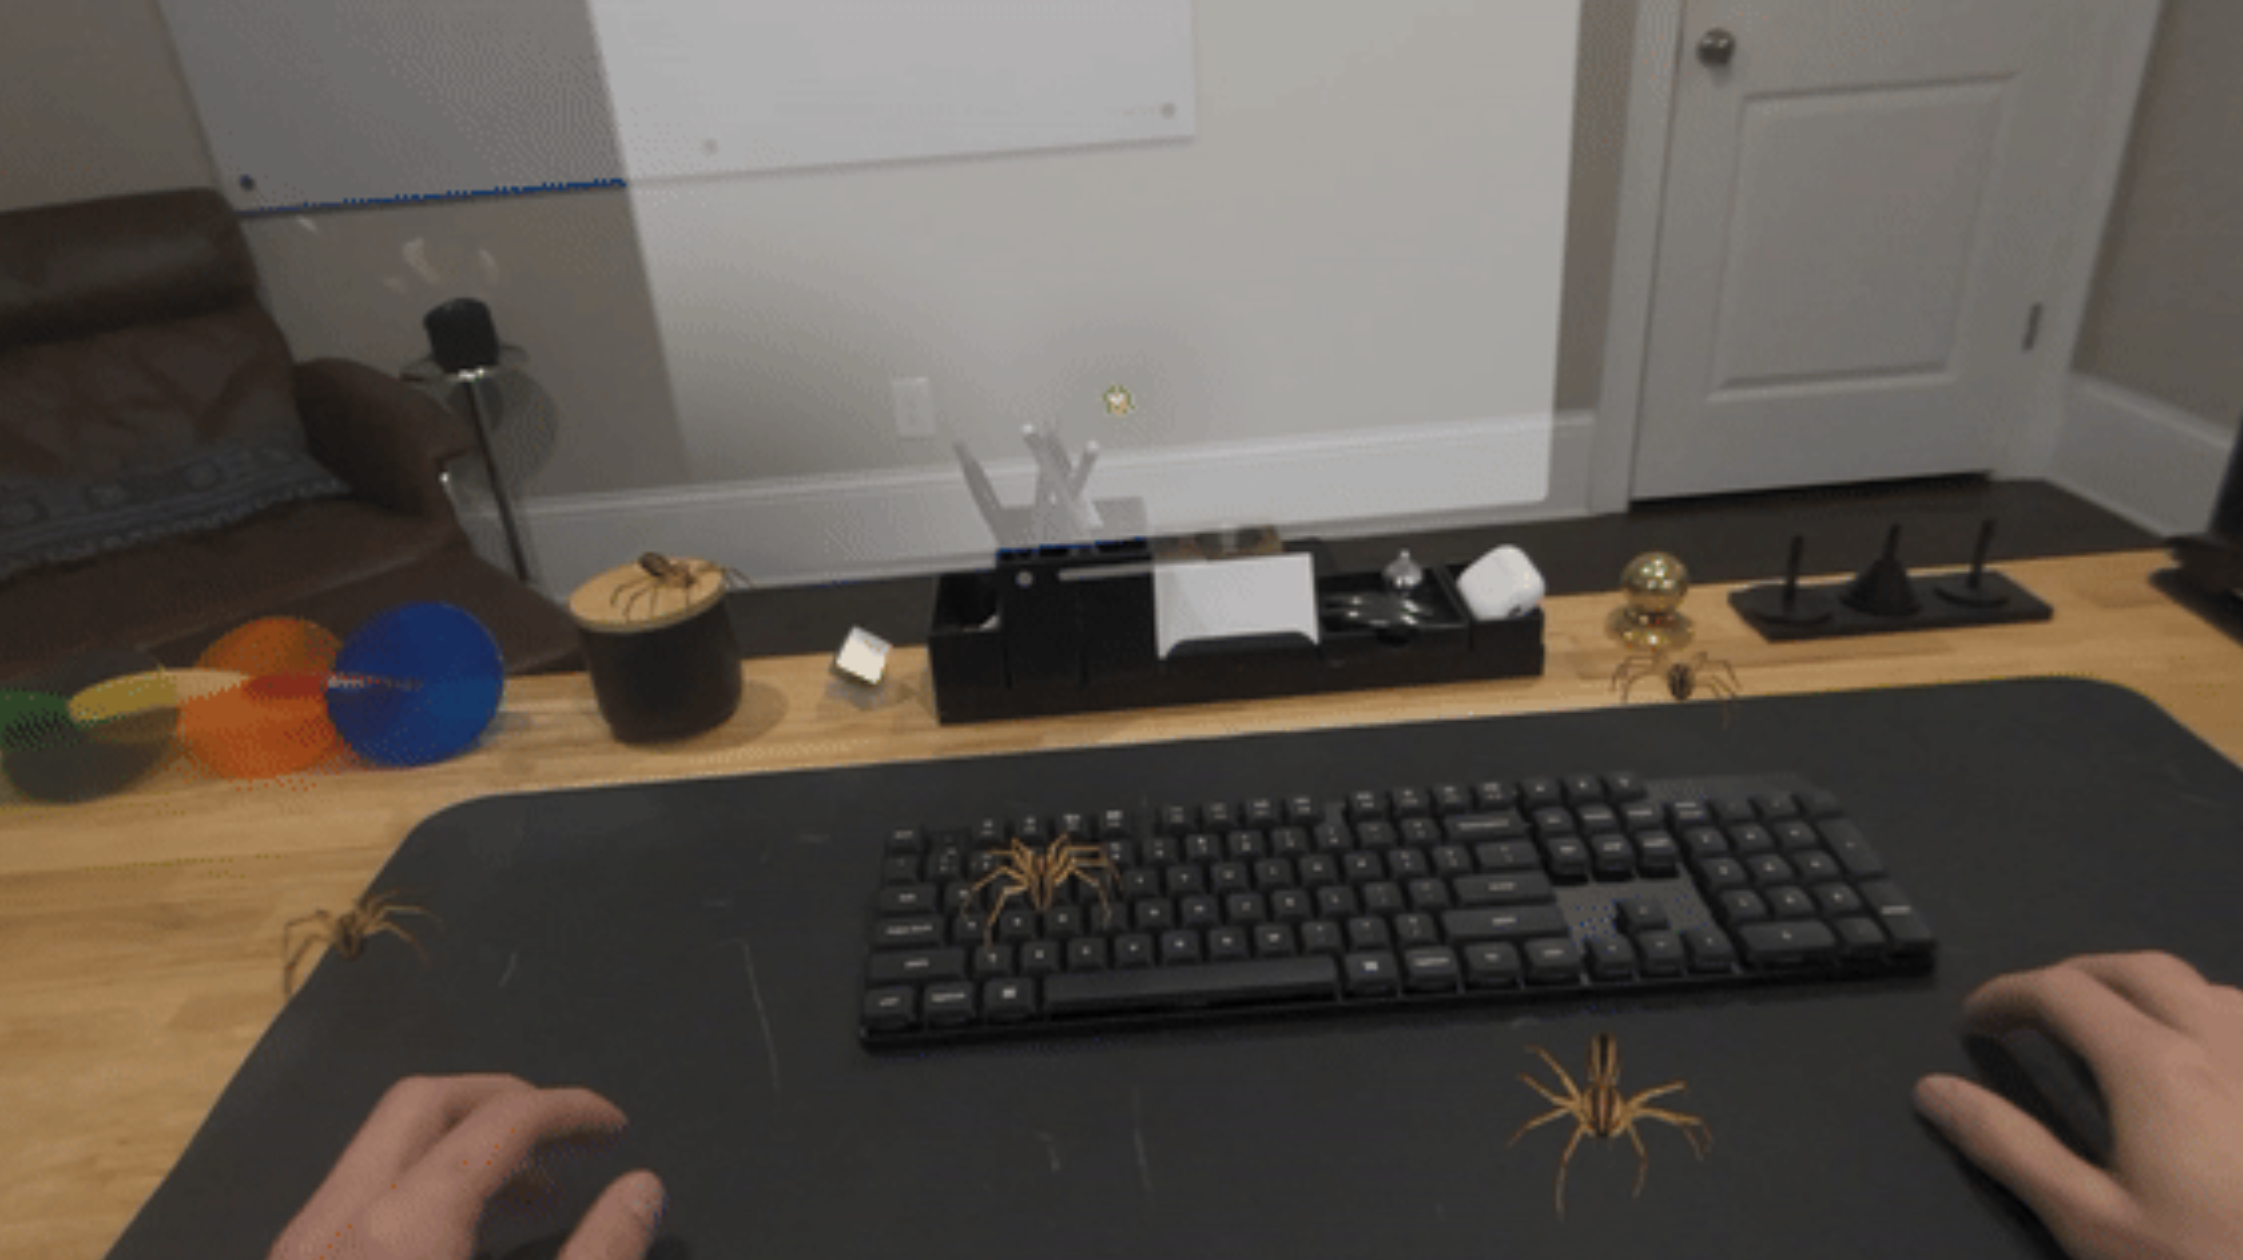 Vision Pro: Horror exploit brings virtual spiders into your own four walls